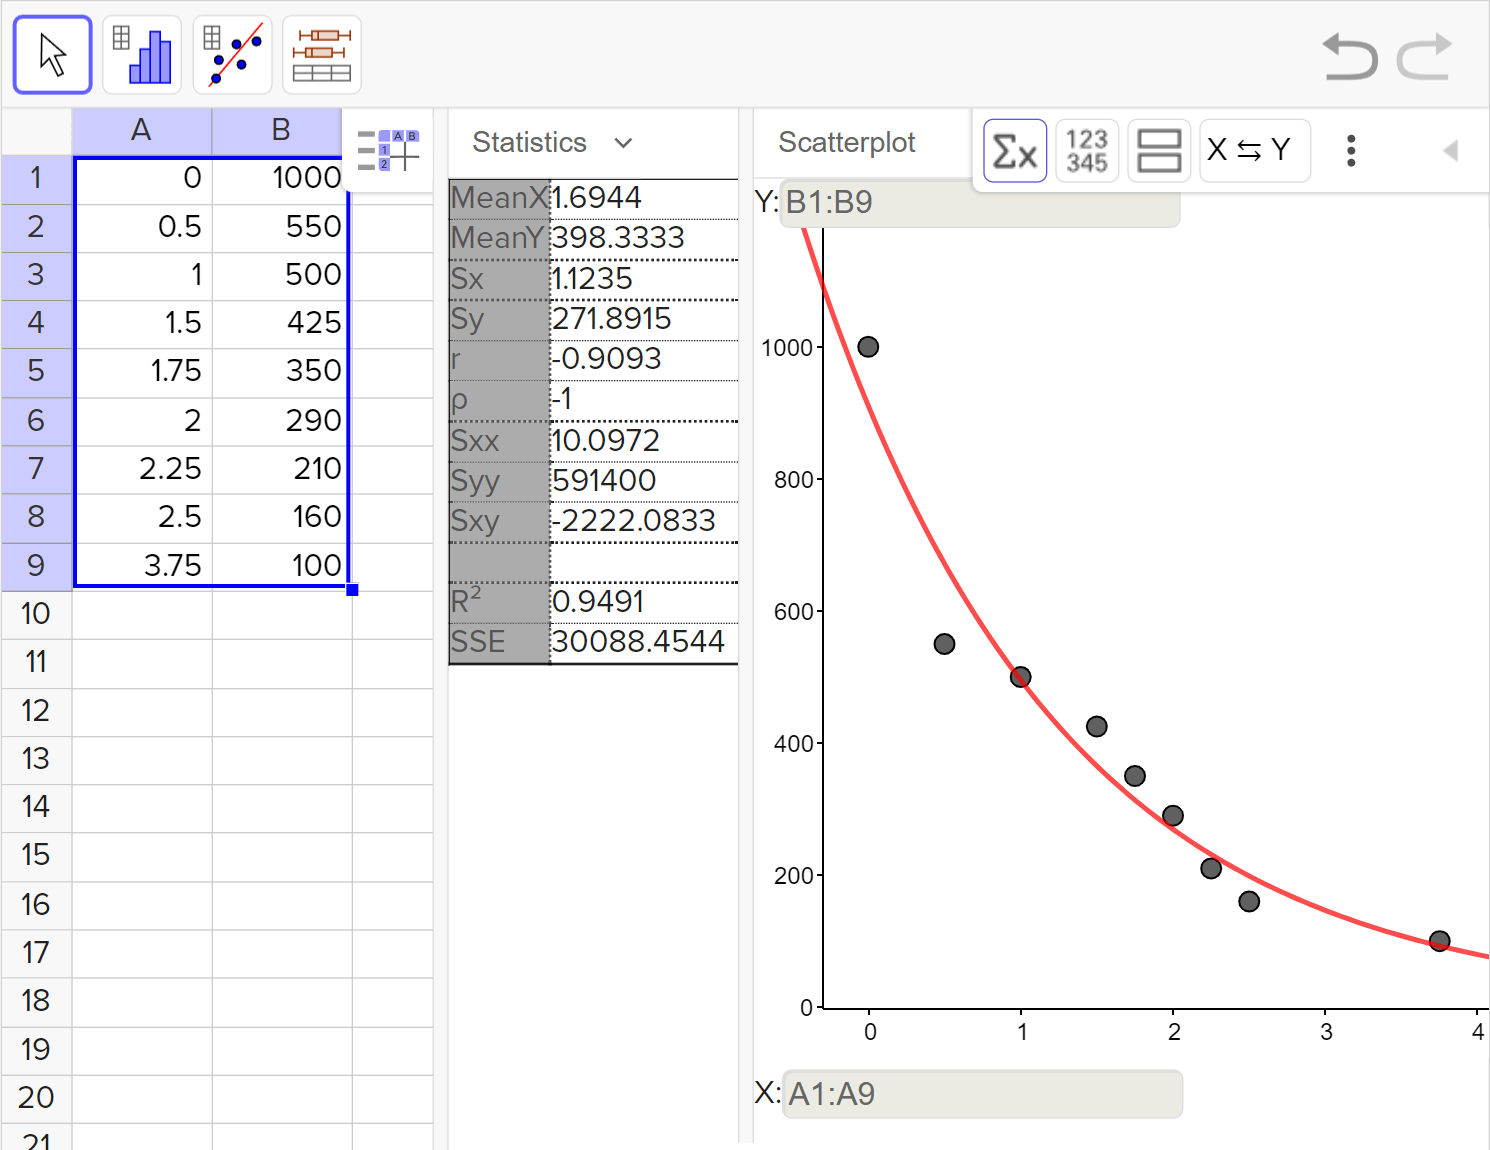 A screenshot of the GeoGebra statistics tool showing the following: On the left side: the numbers 0, 0.5, 1, 1.5, 1.75, 2, 2.25, 2.5, and 3.75 in column A, rows 1 to 9 and the numbers 1000, 550, 500, 425, 350, 290, 210, 160, and 100 in column B, rows 1 to 9. On the middle: a list of statistical values is shown. On the right side: a scatterplot and the best fit curve are shown. Speak to your teacher for more details.